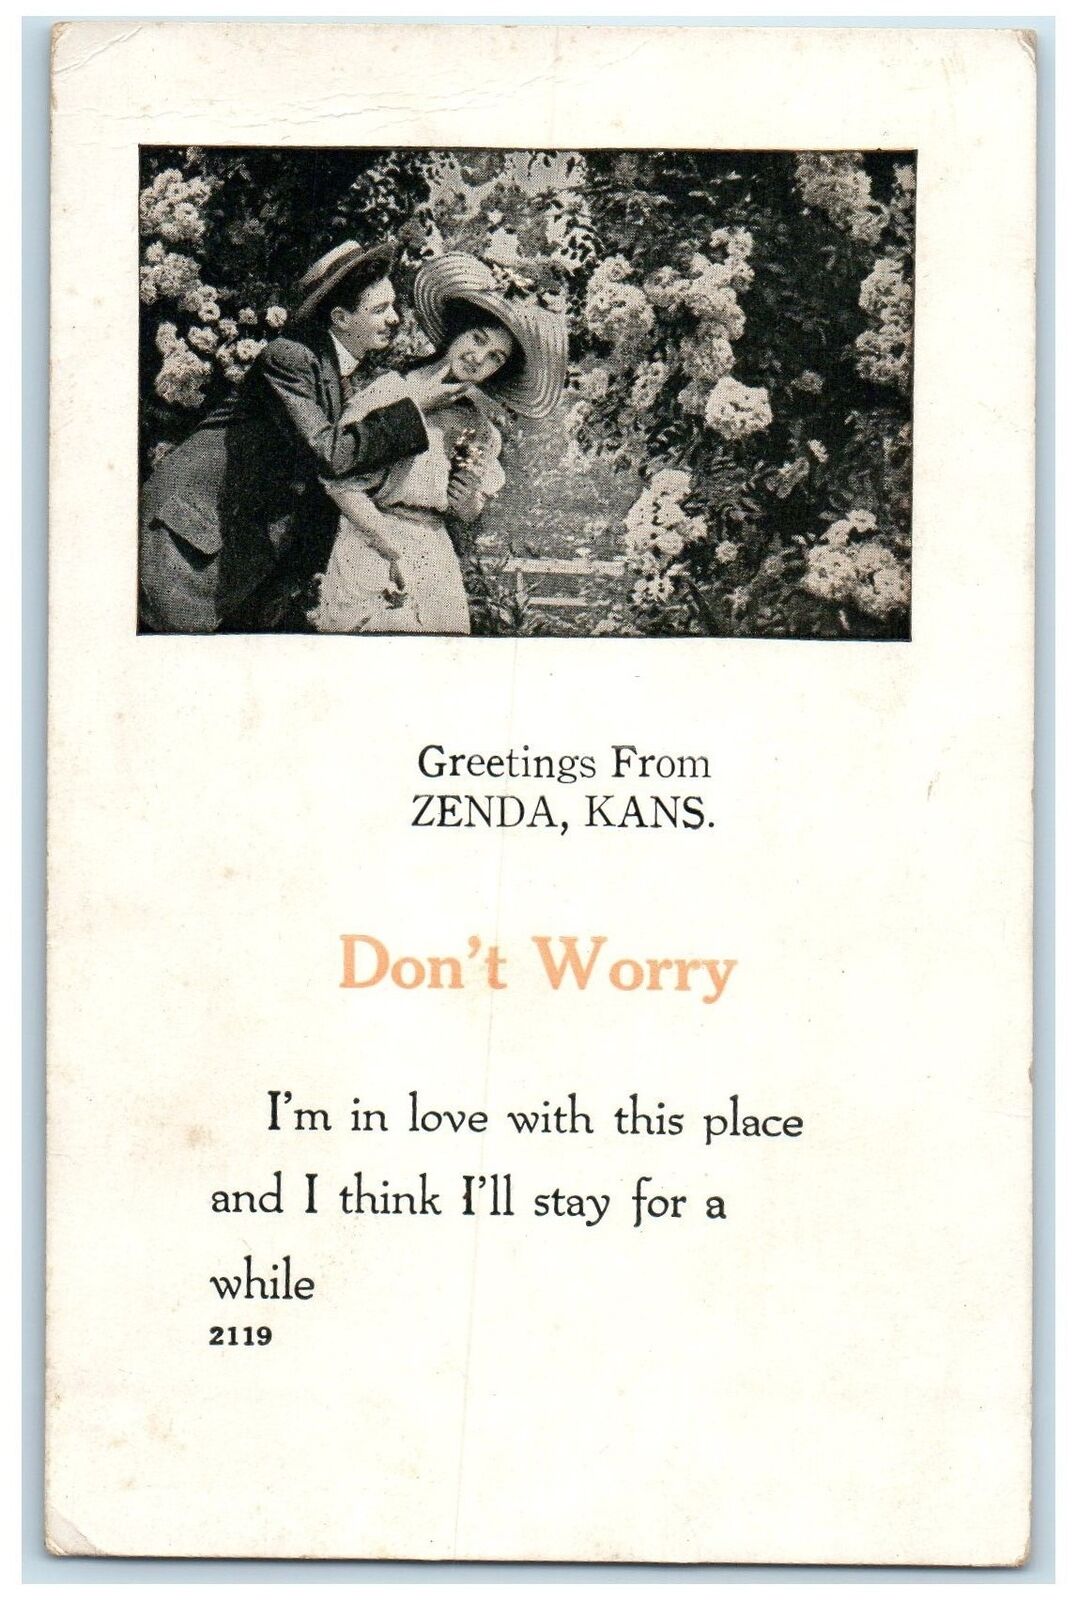 1915 Greetings From Zenda Don't Worry I'm In Love This Place Kansas KS Postcard